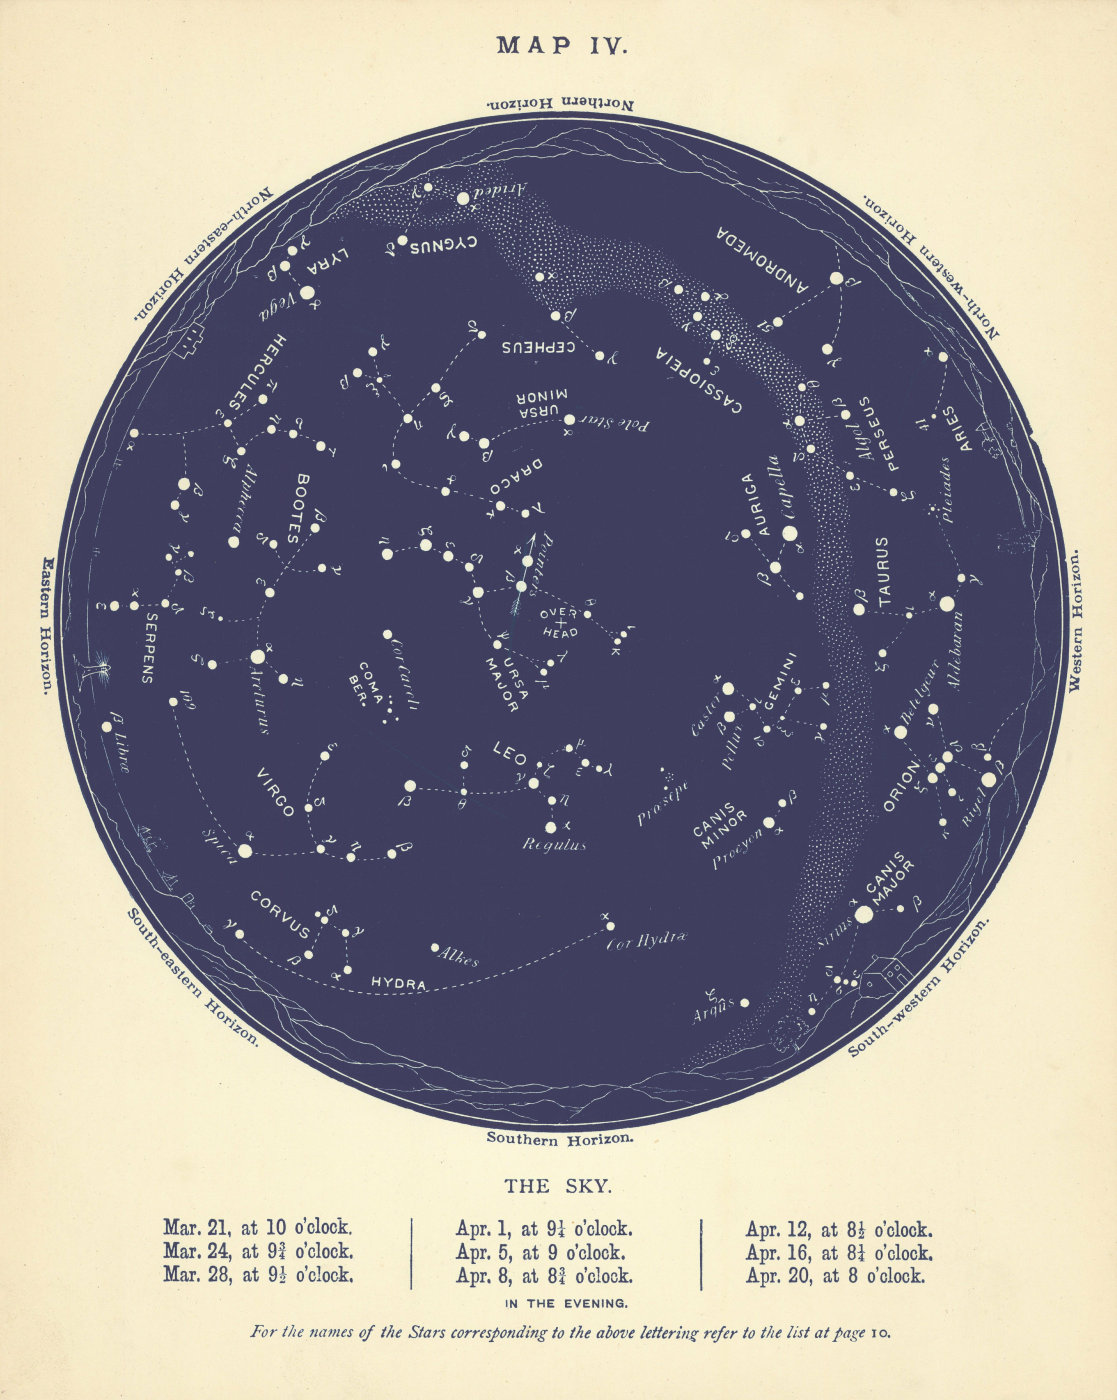 Associate Product STAR MAP IV. The Night Sky. March-April. Astronomy. PROCTOR 1896 old